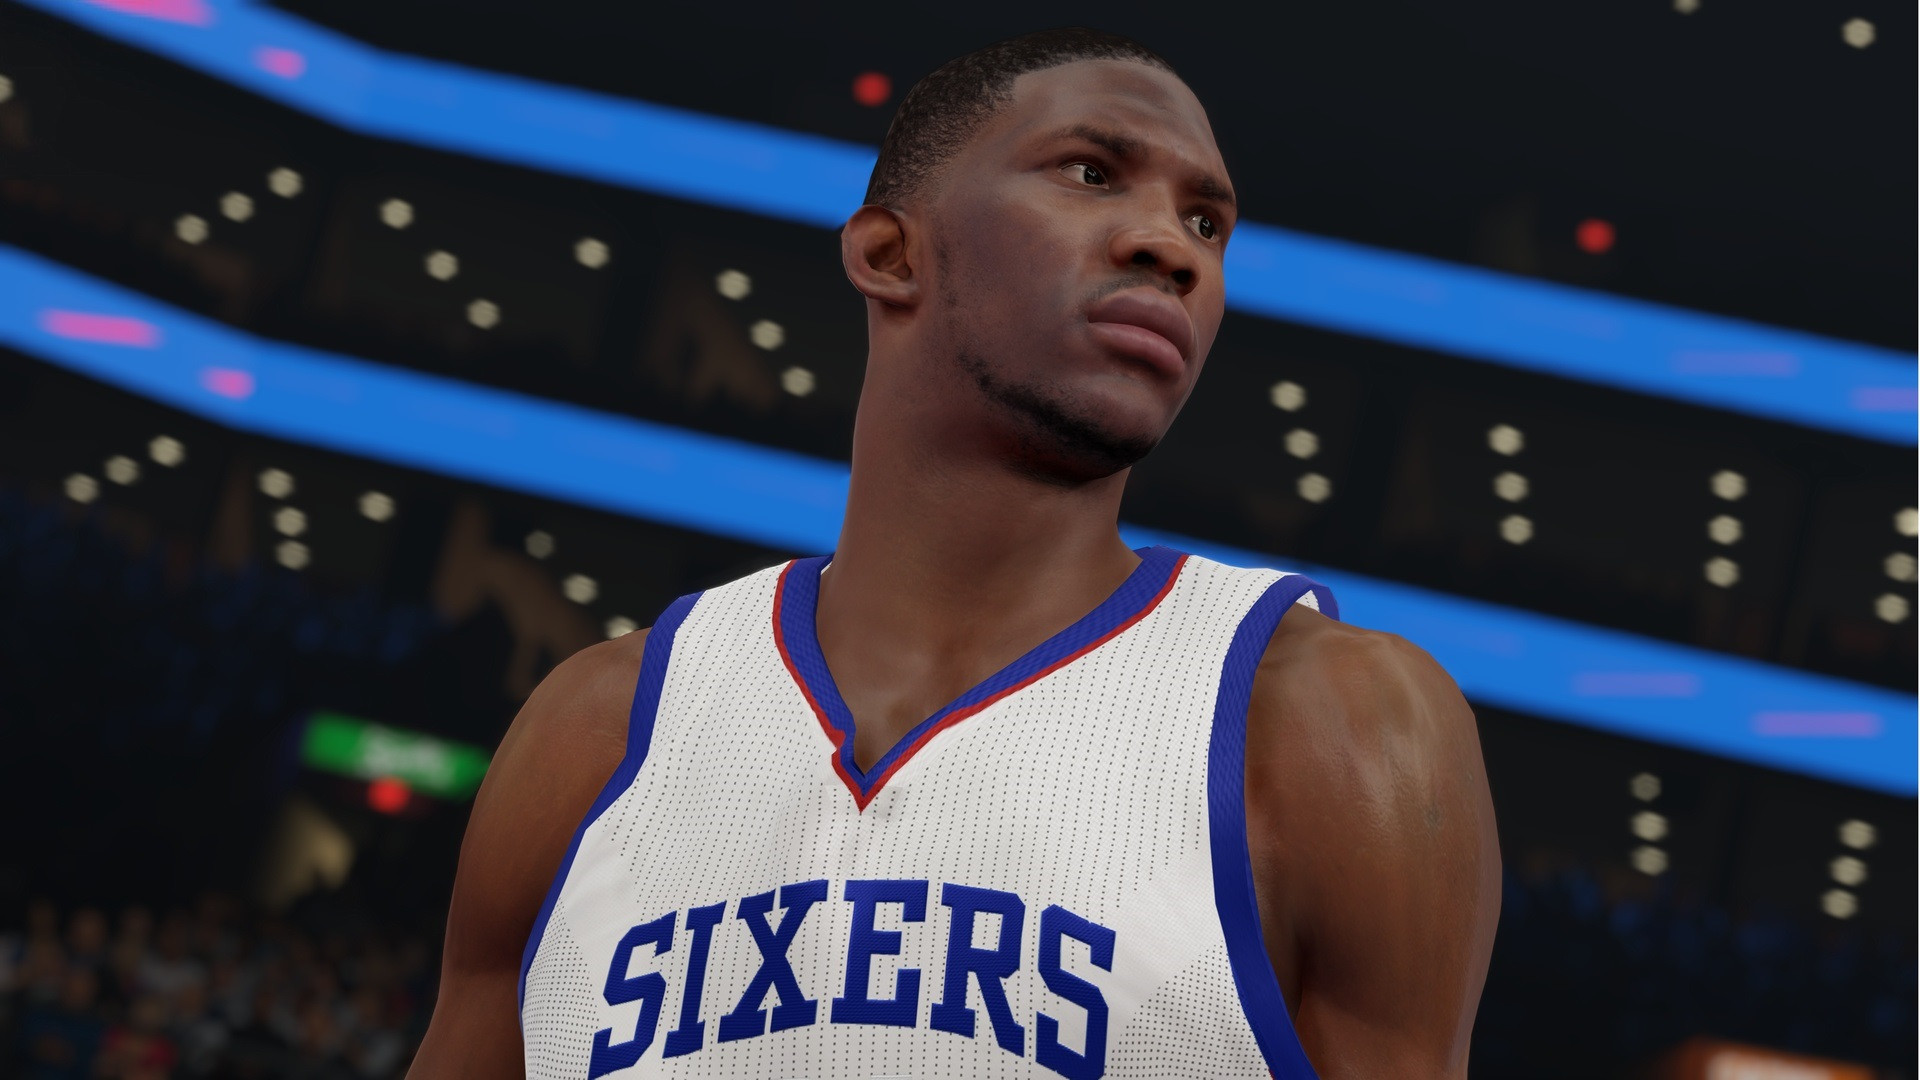 New NBA 2K15 1080p PS4 Screenshots Released, Shows Highly Detailed ...